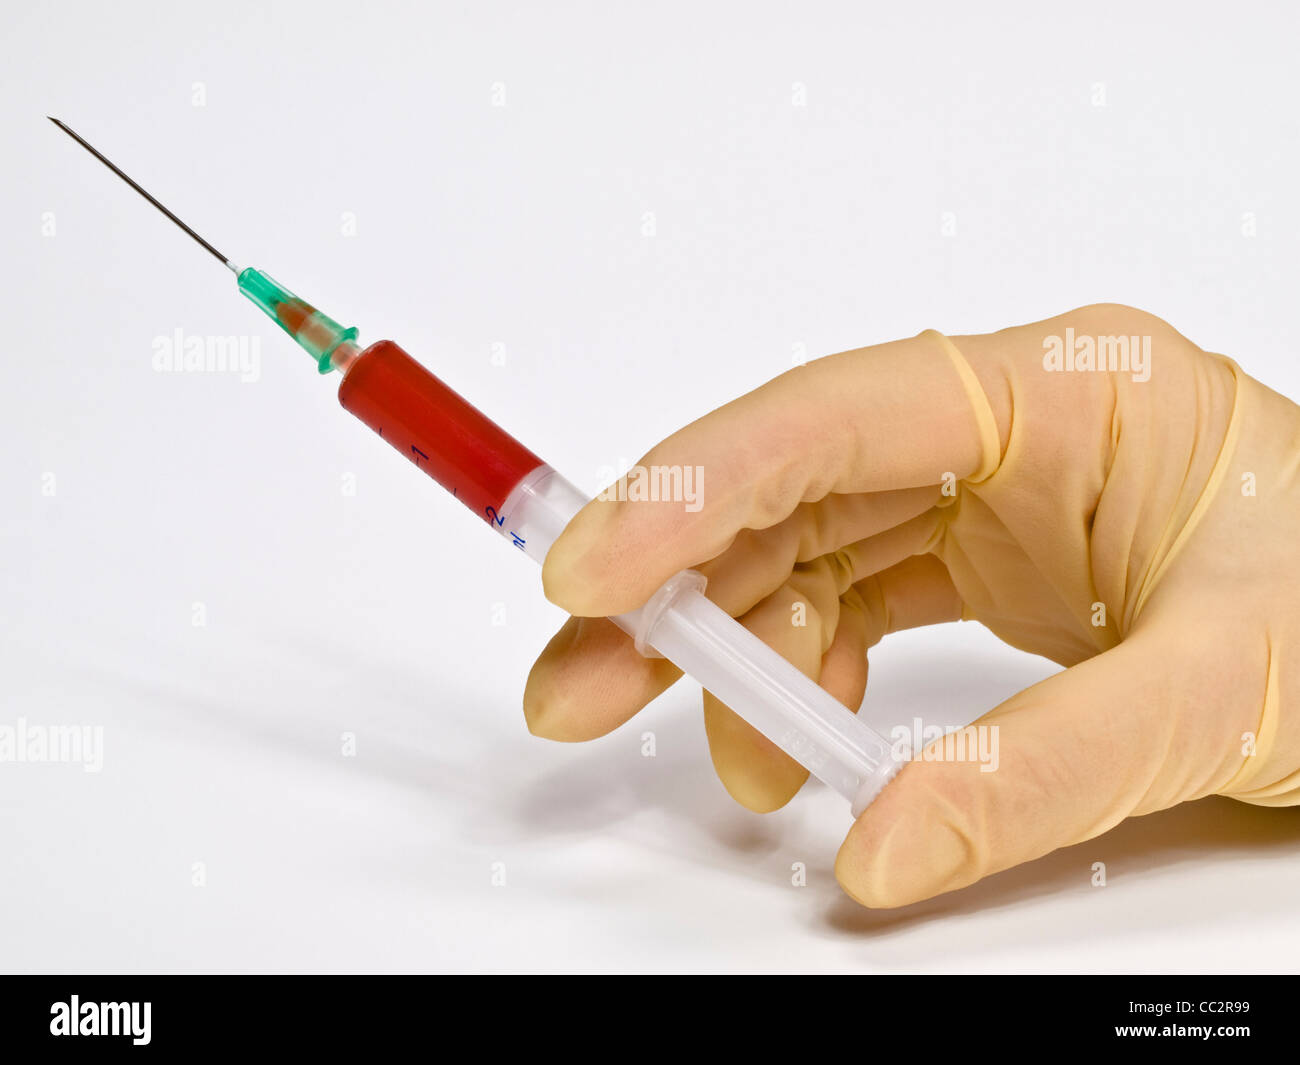 a syringe is held in the hand with rubber gloves Stock Photo